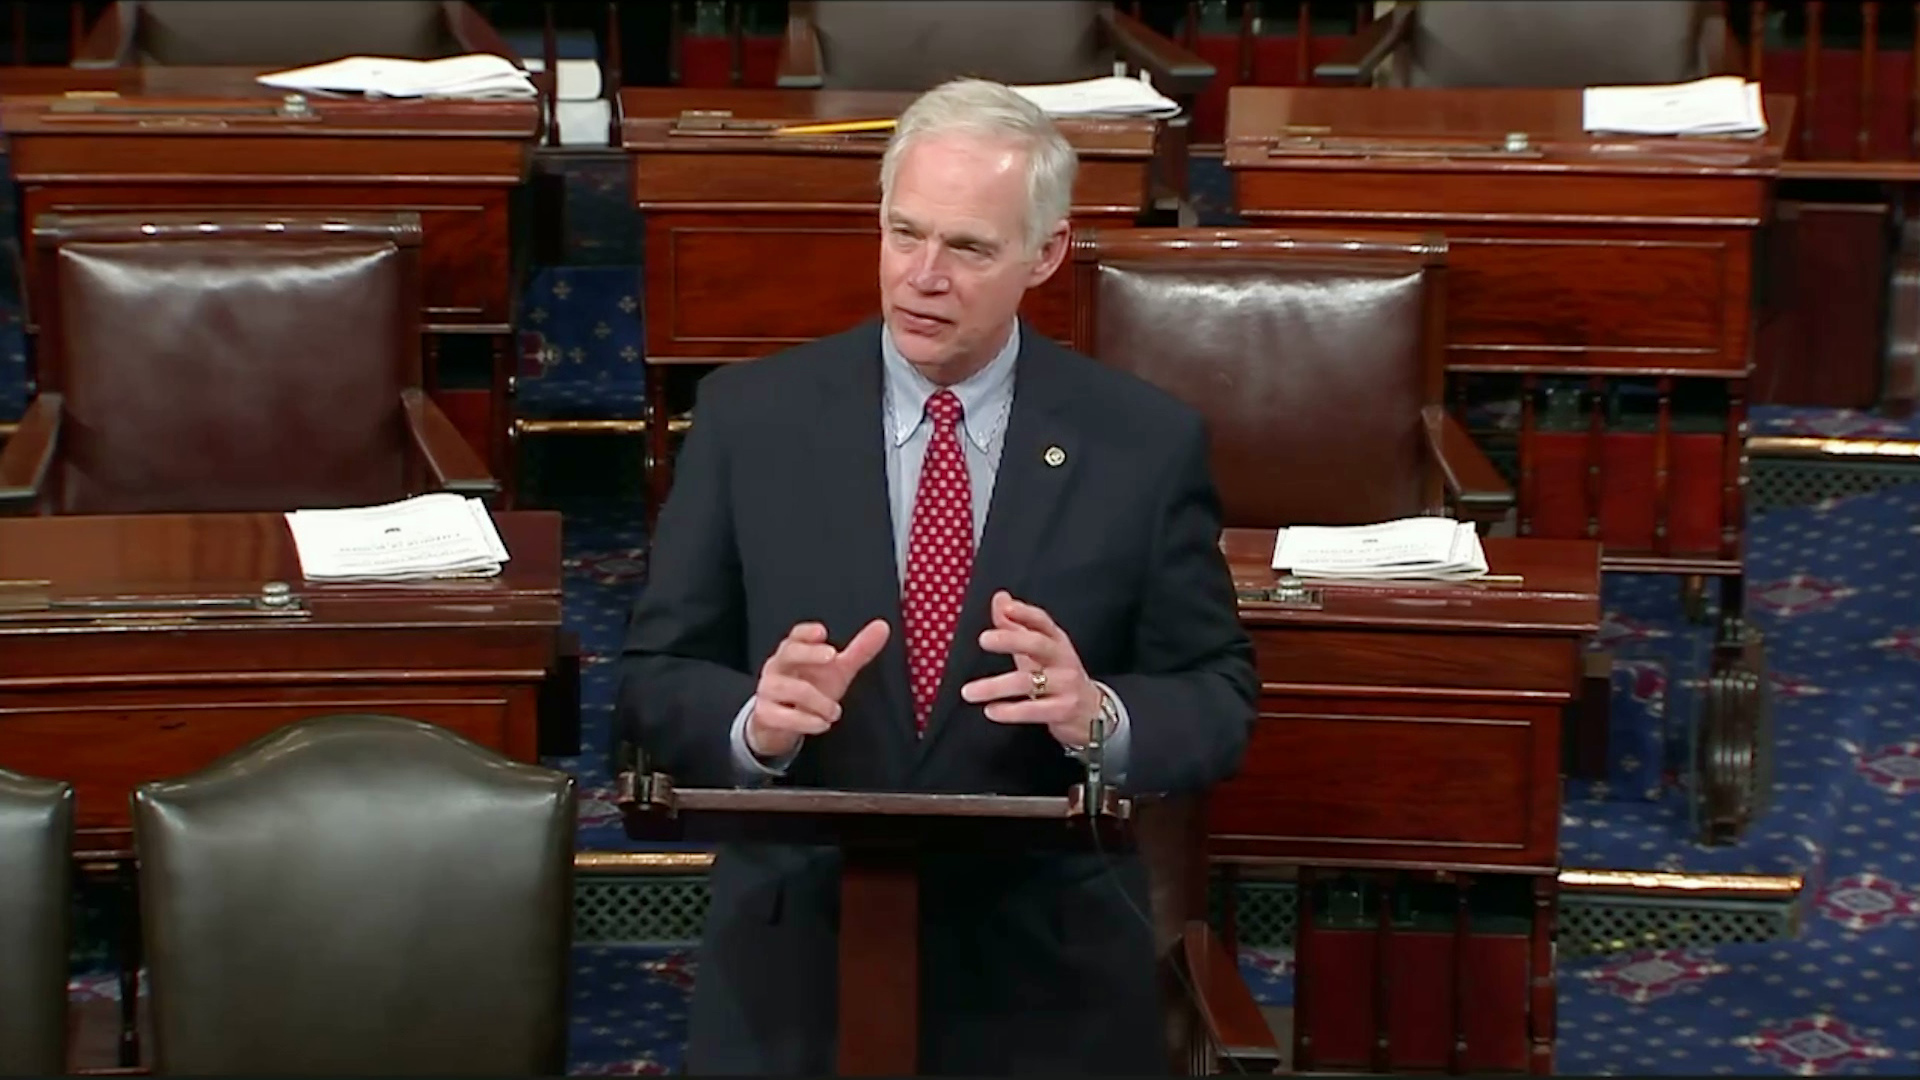 Ron Johnson stands at a wooden podium and speaks while gesturing with his hands, with polished wood desks and leather-padded chairs in the background.